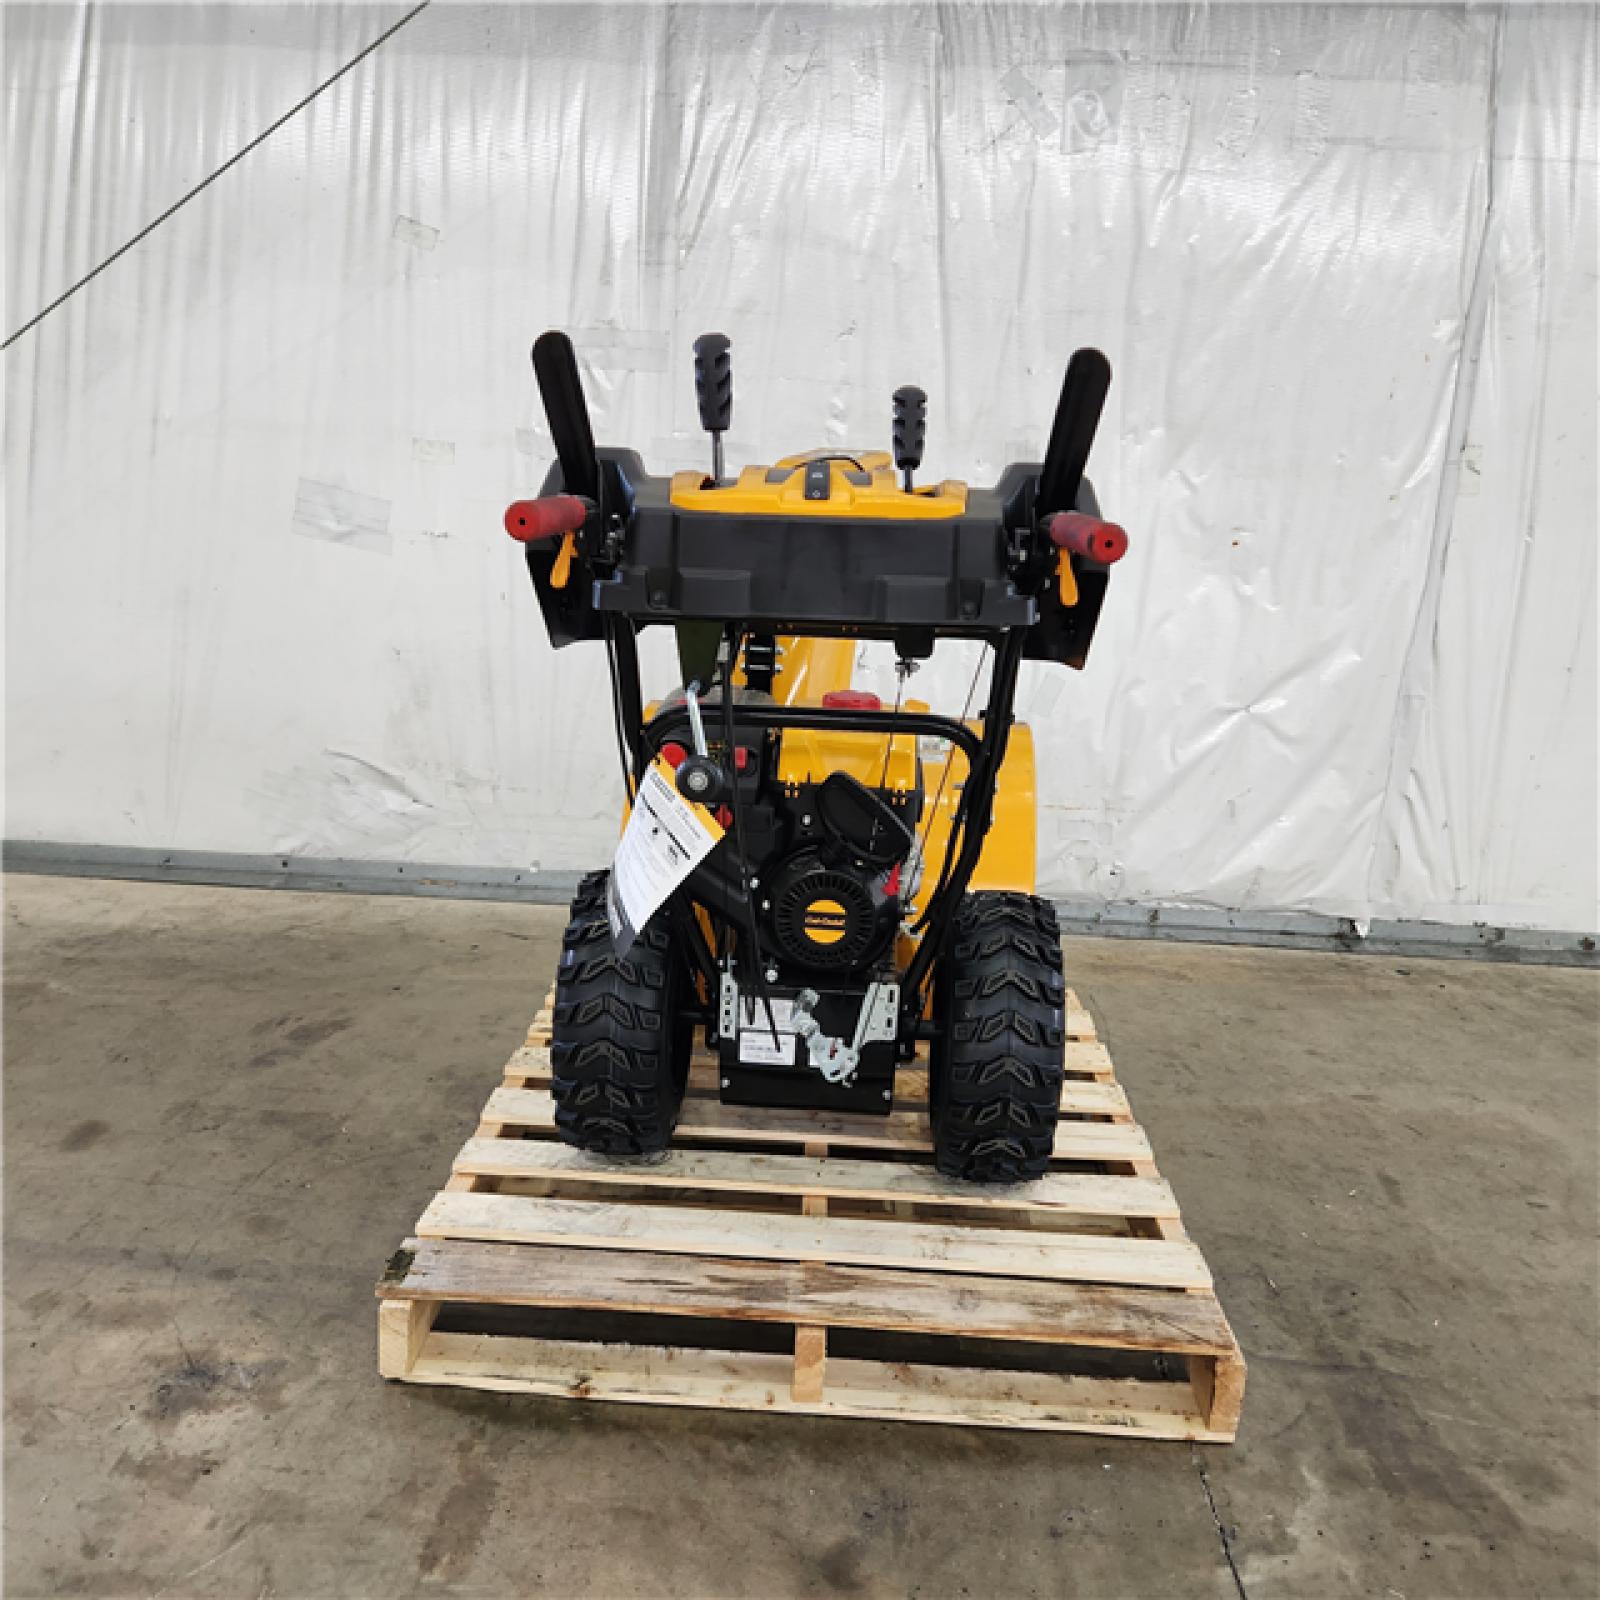 Houston Location - AS-IS Cub Cadet 2x 28'' in Snow Blower